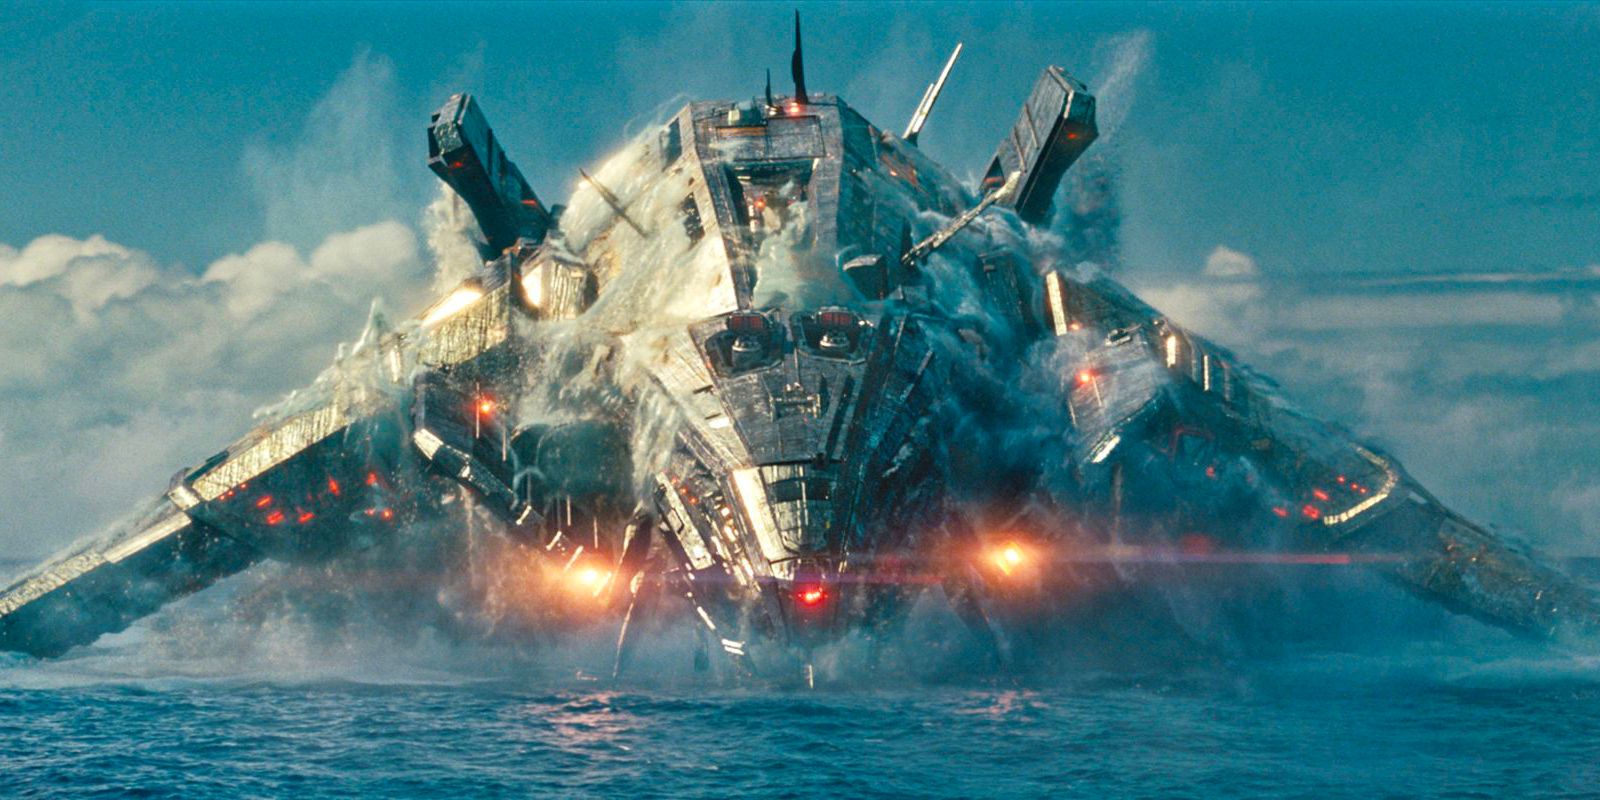 A massive alien ship rises from the ocean in the 2012 movie 'Battleship'